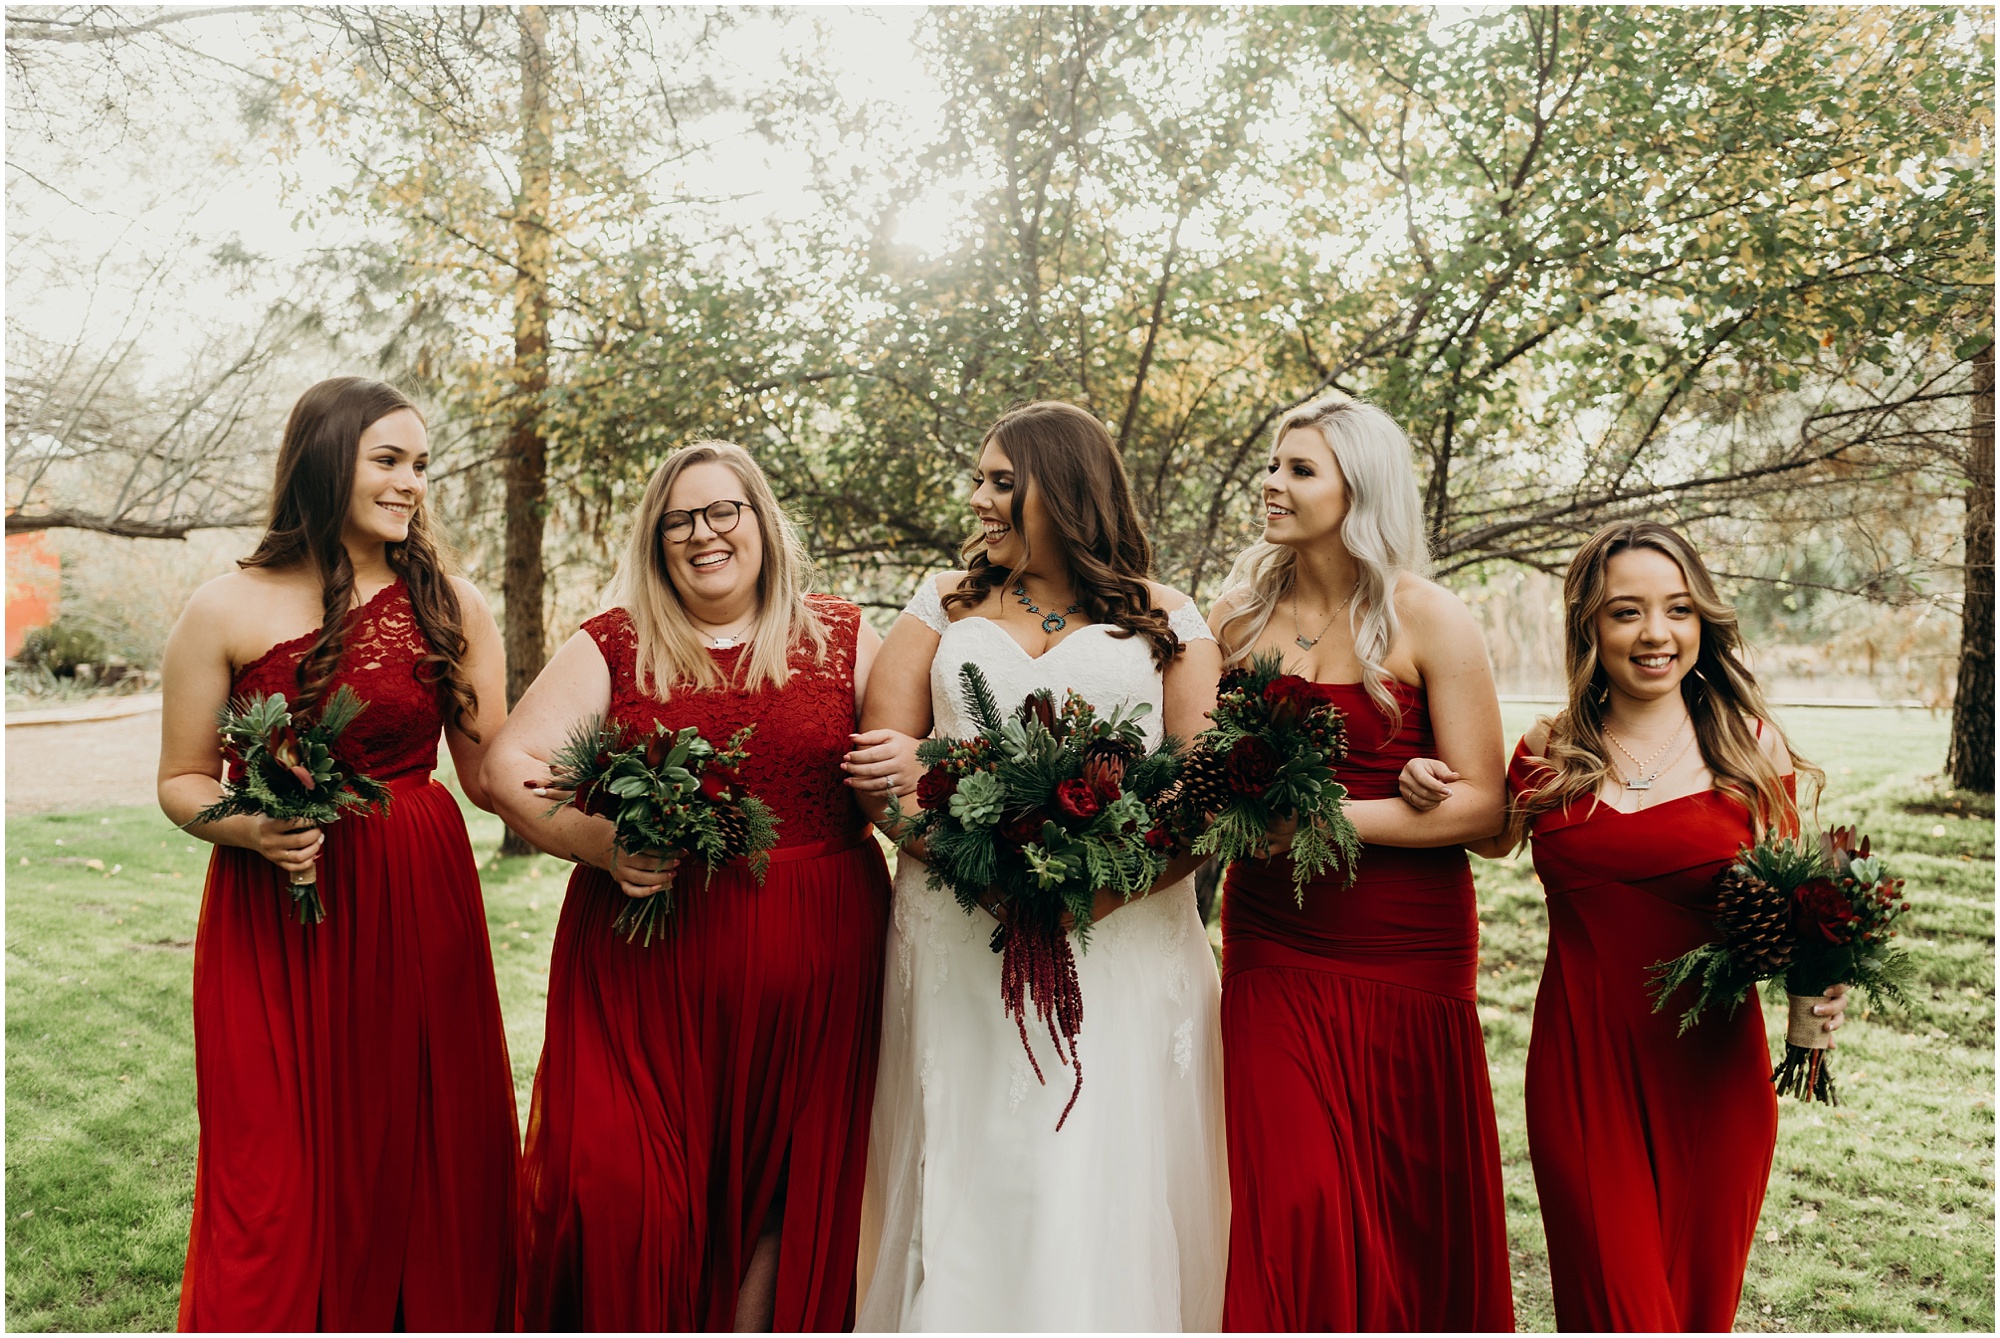 Candid and fun bridesmaids photos with red bridesmaids dresses for a Christmas Wedding.